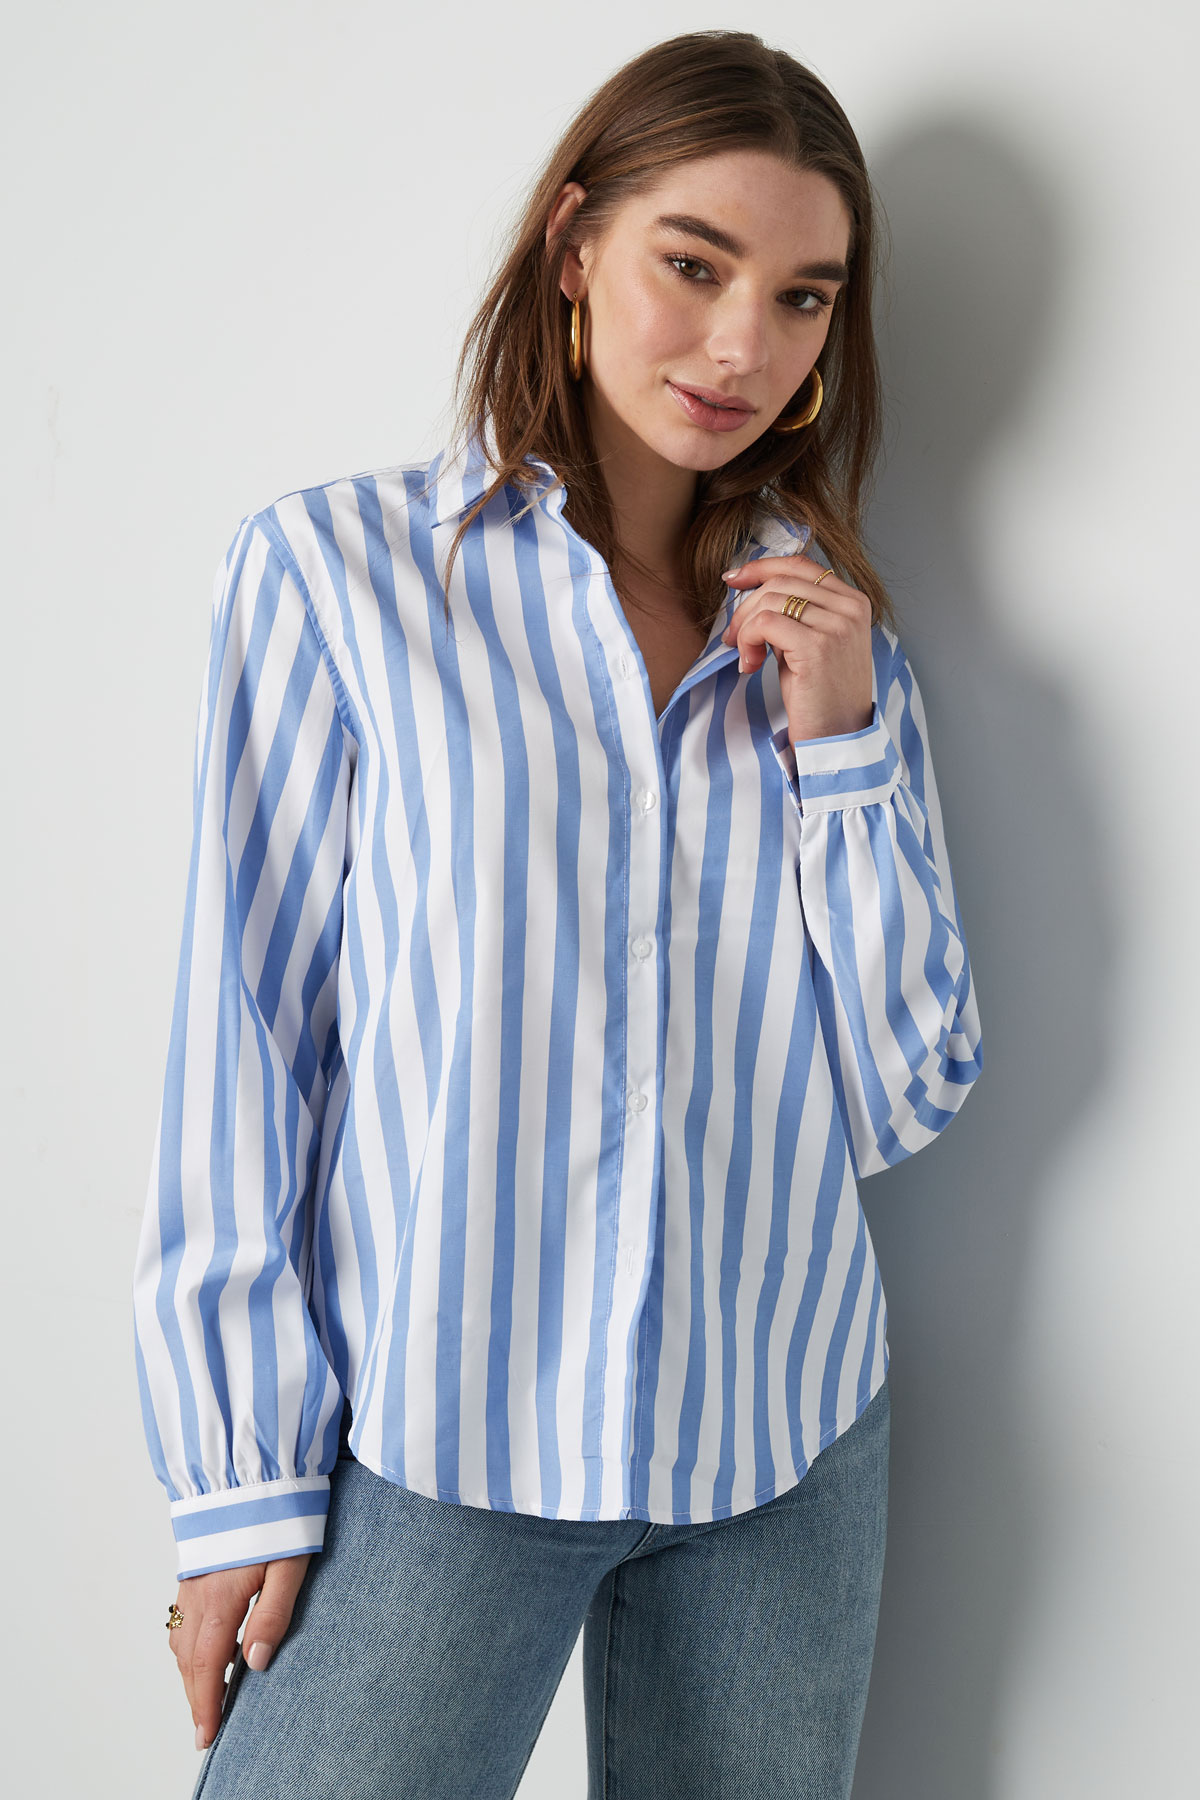 Striped casual blouse - black and white h5 Picture6